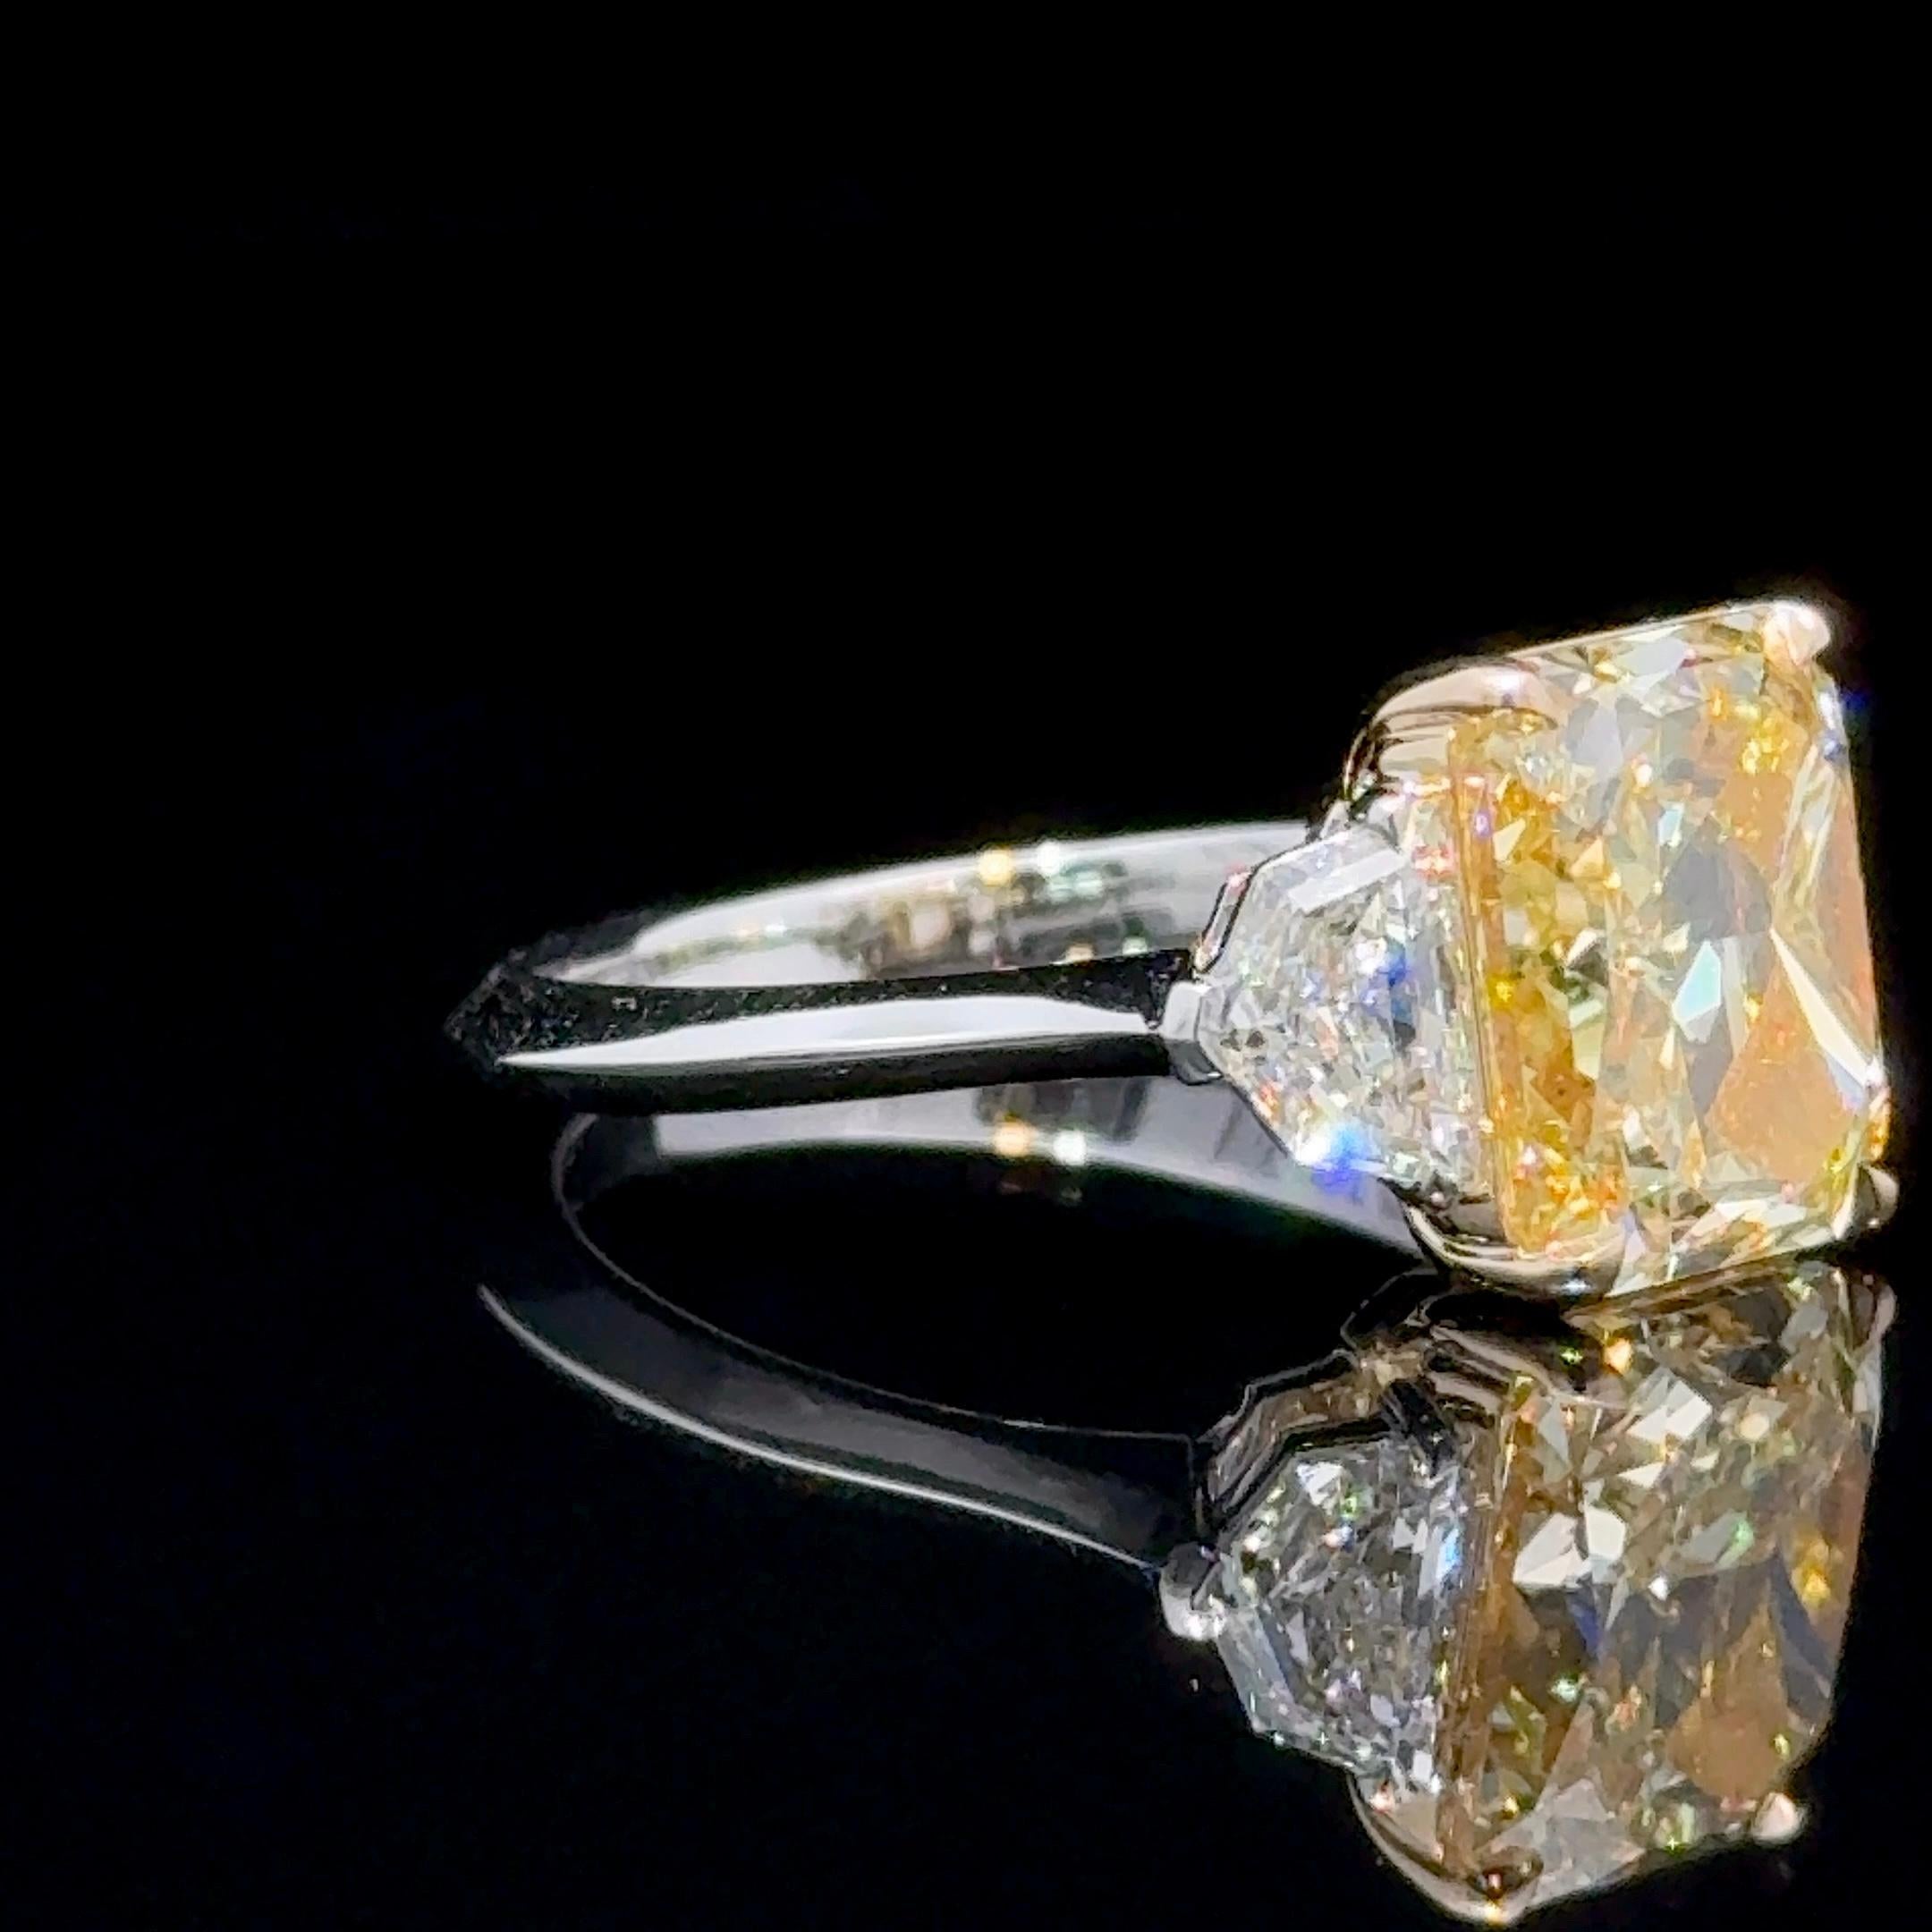 Amongst Yellow Natural Fancy Color Diamonds, Elongated, rectangular shapes are the most coveted and desired outlines for Radiant Cuts.

A GIA Certified 4.28 Carat Rectangular Radiant Fancy Yellow Internally Flawless Diamond Ring
GIA graded as Fancy